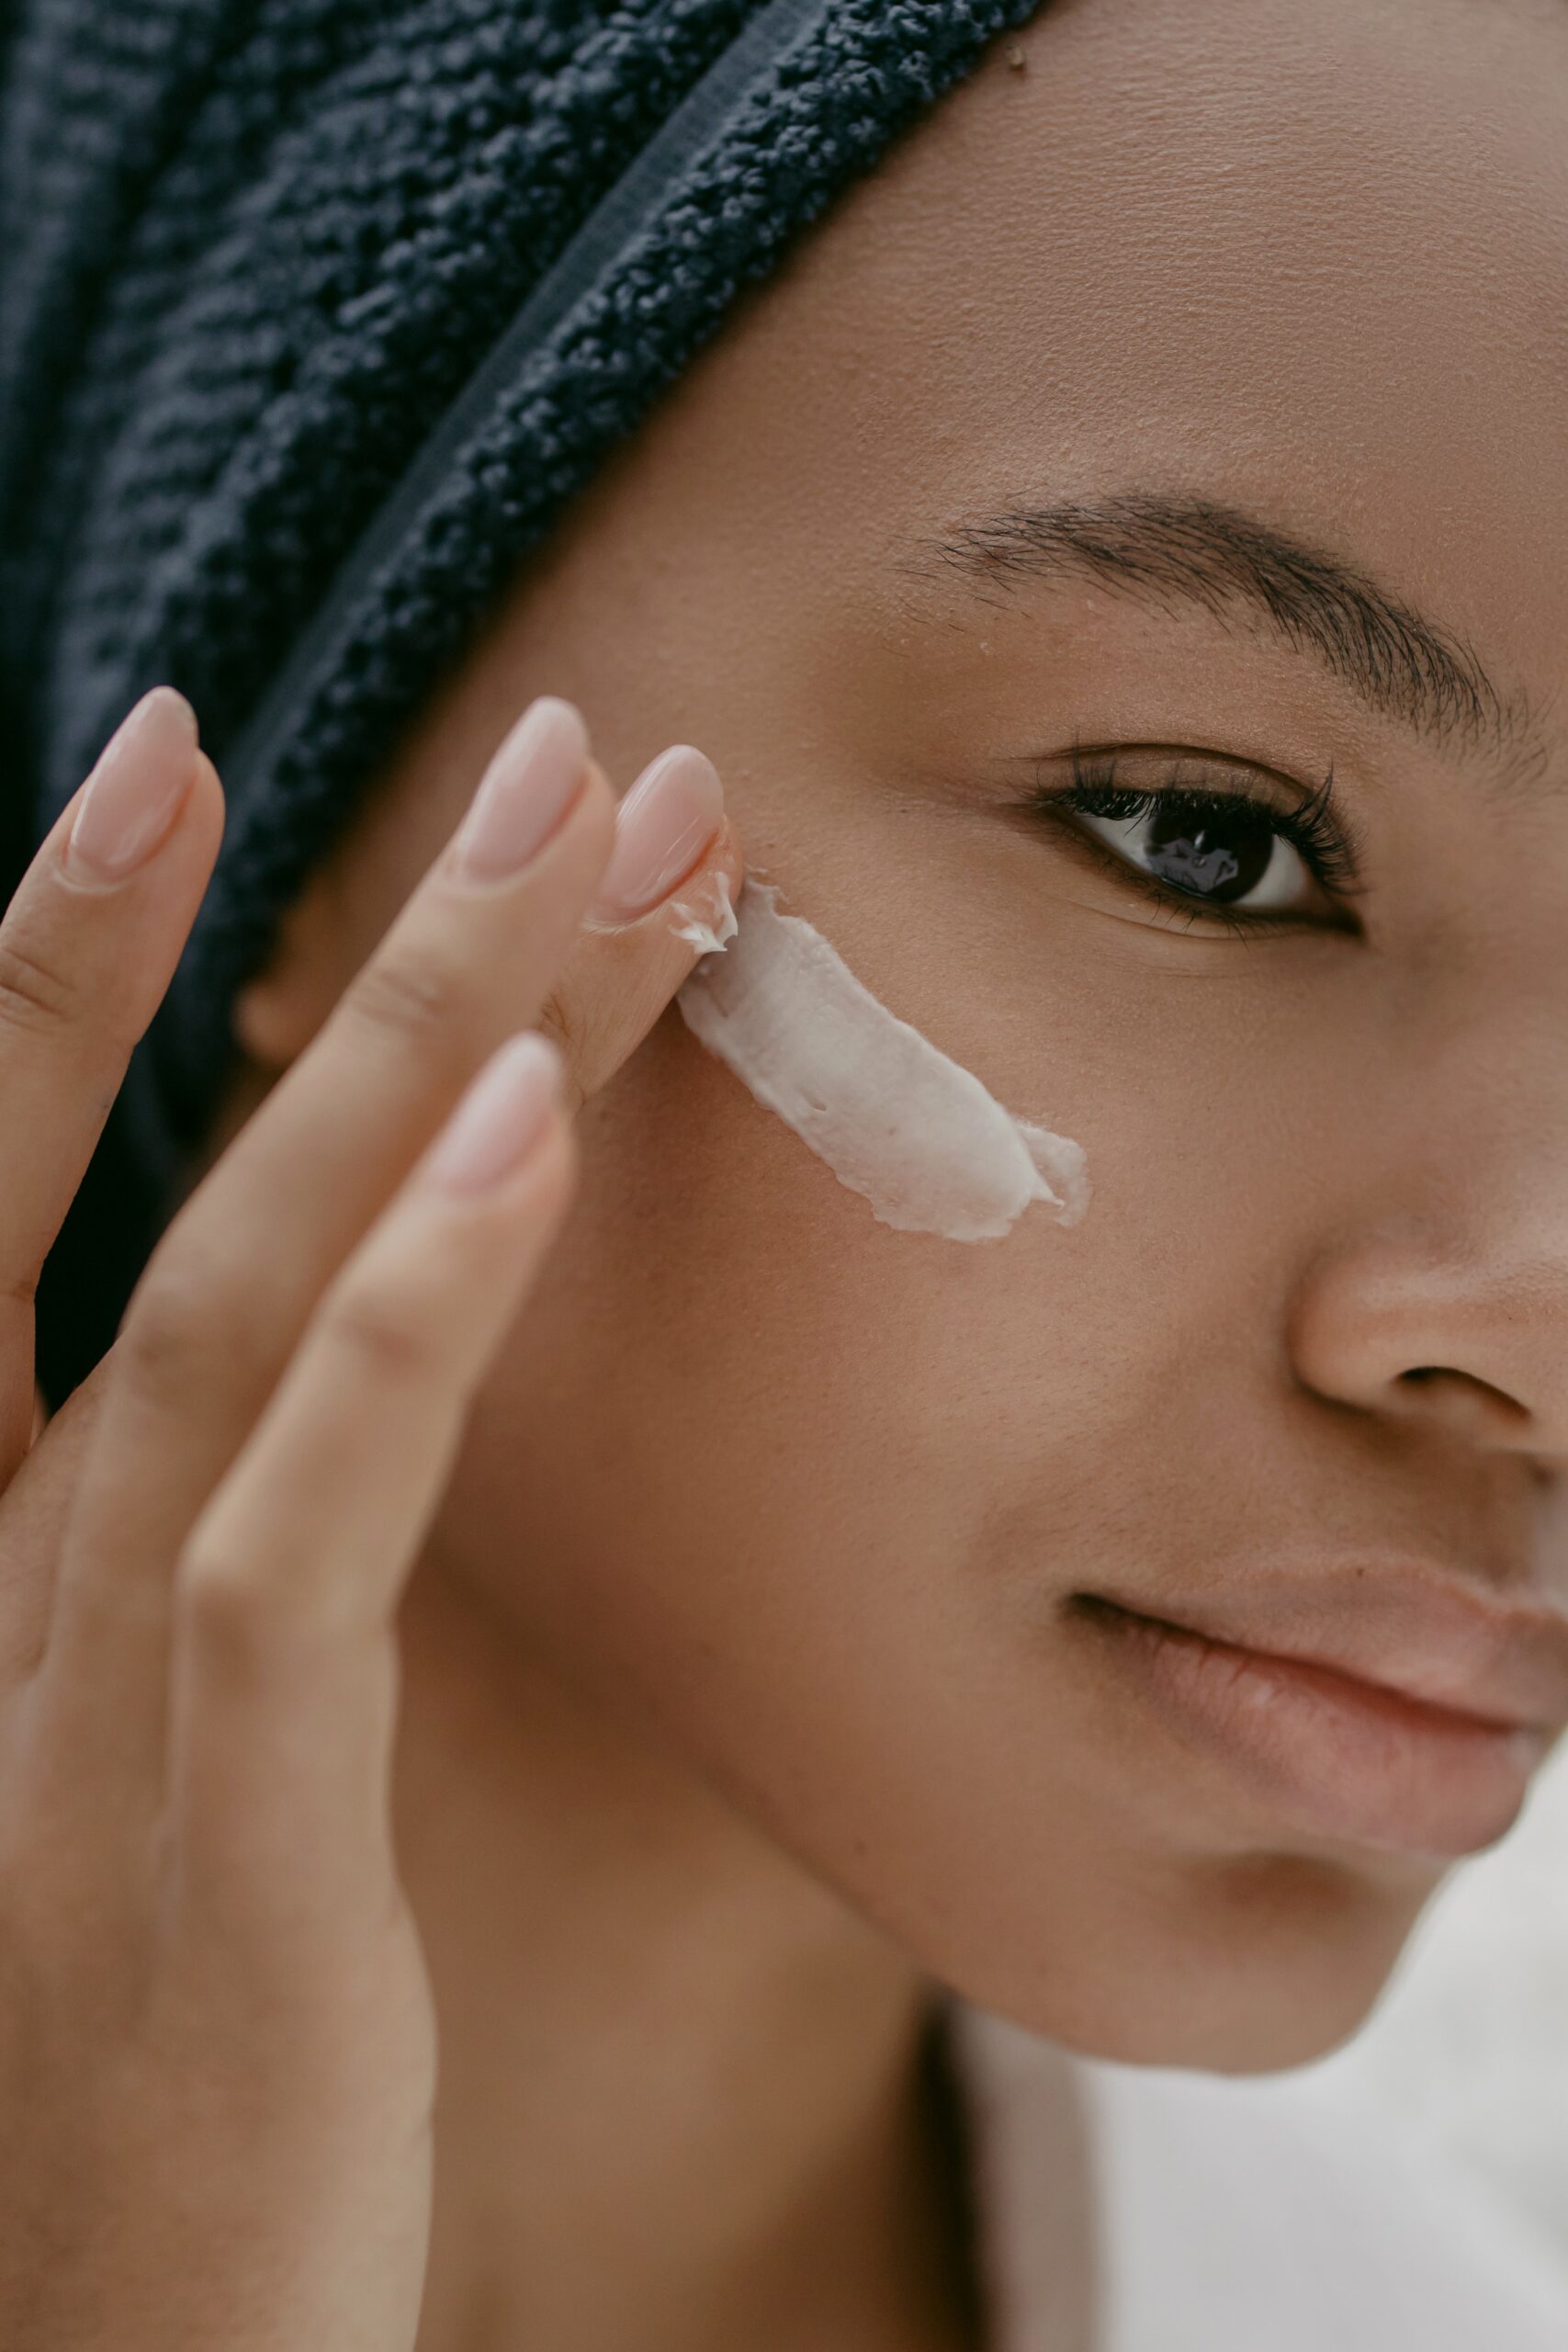 This post is about moisturizers for all skin types.